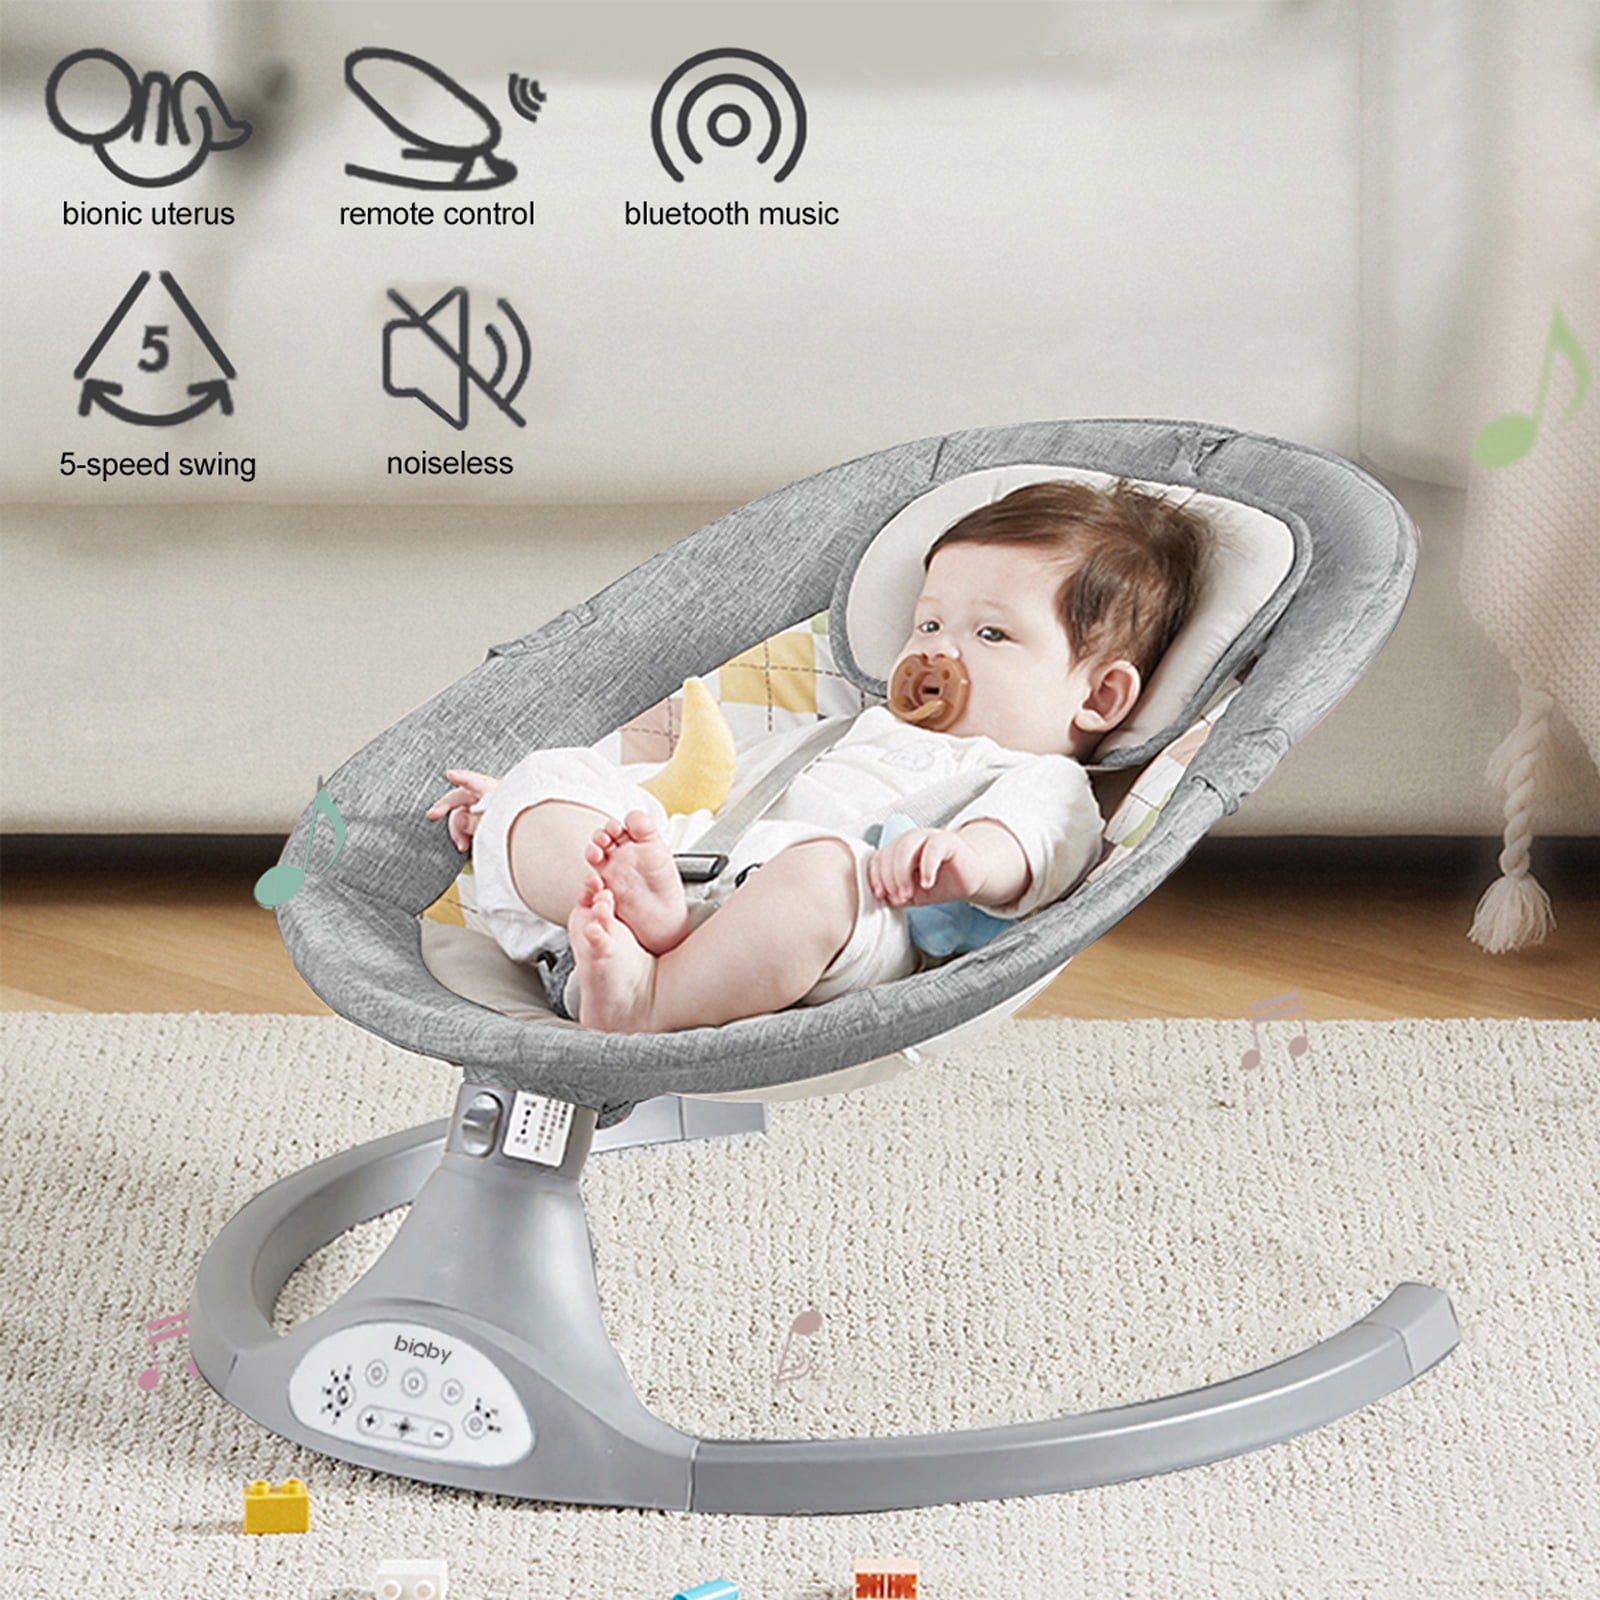 USB Automatic rocking chair Electric Baby Crib Cradle Remote control US SHIP TOP 